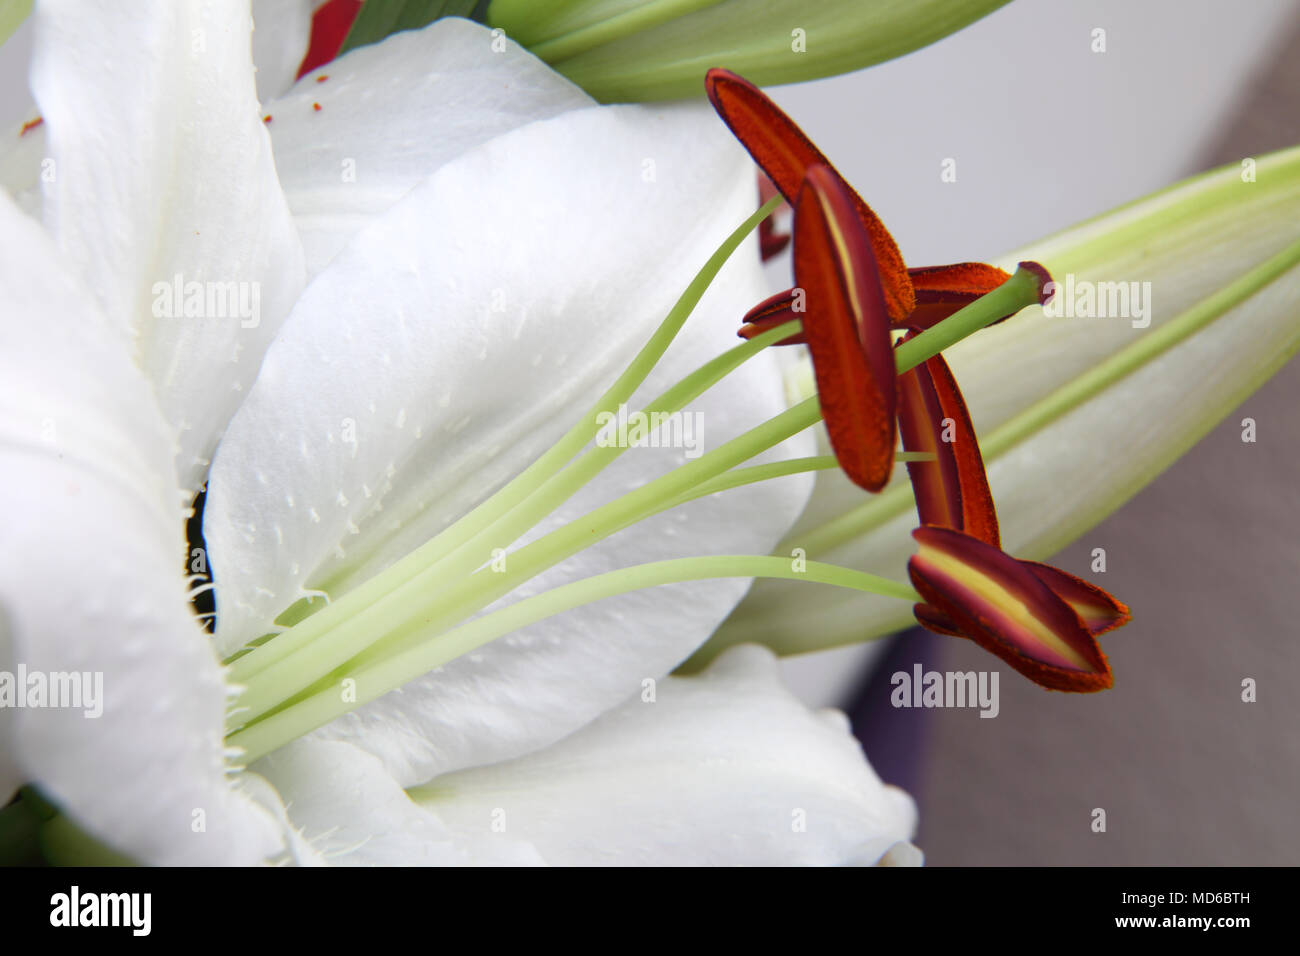 Image result for Images of white lilies with stamen